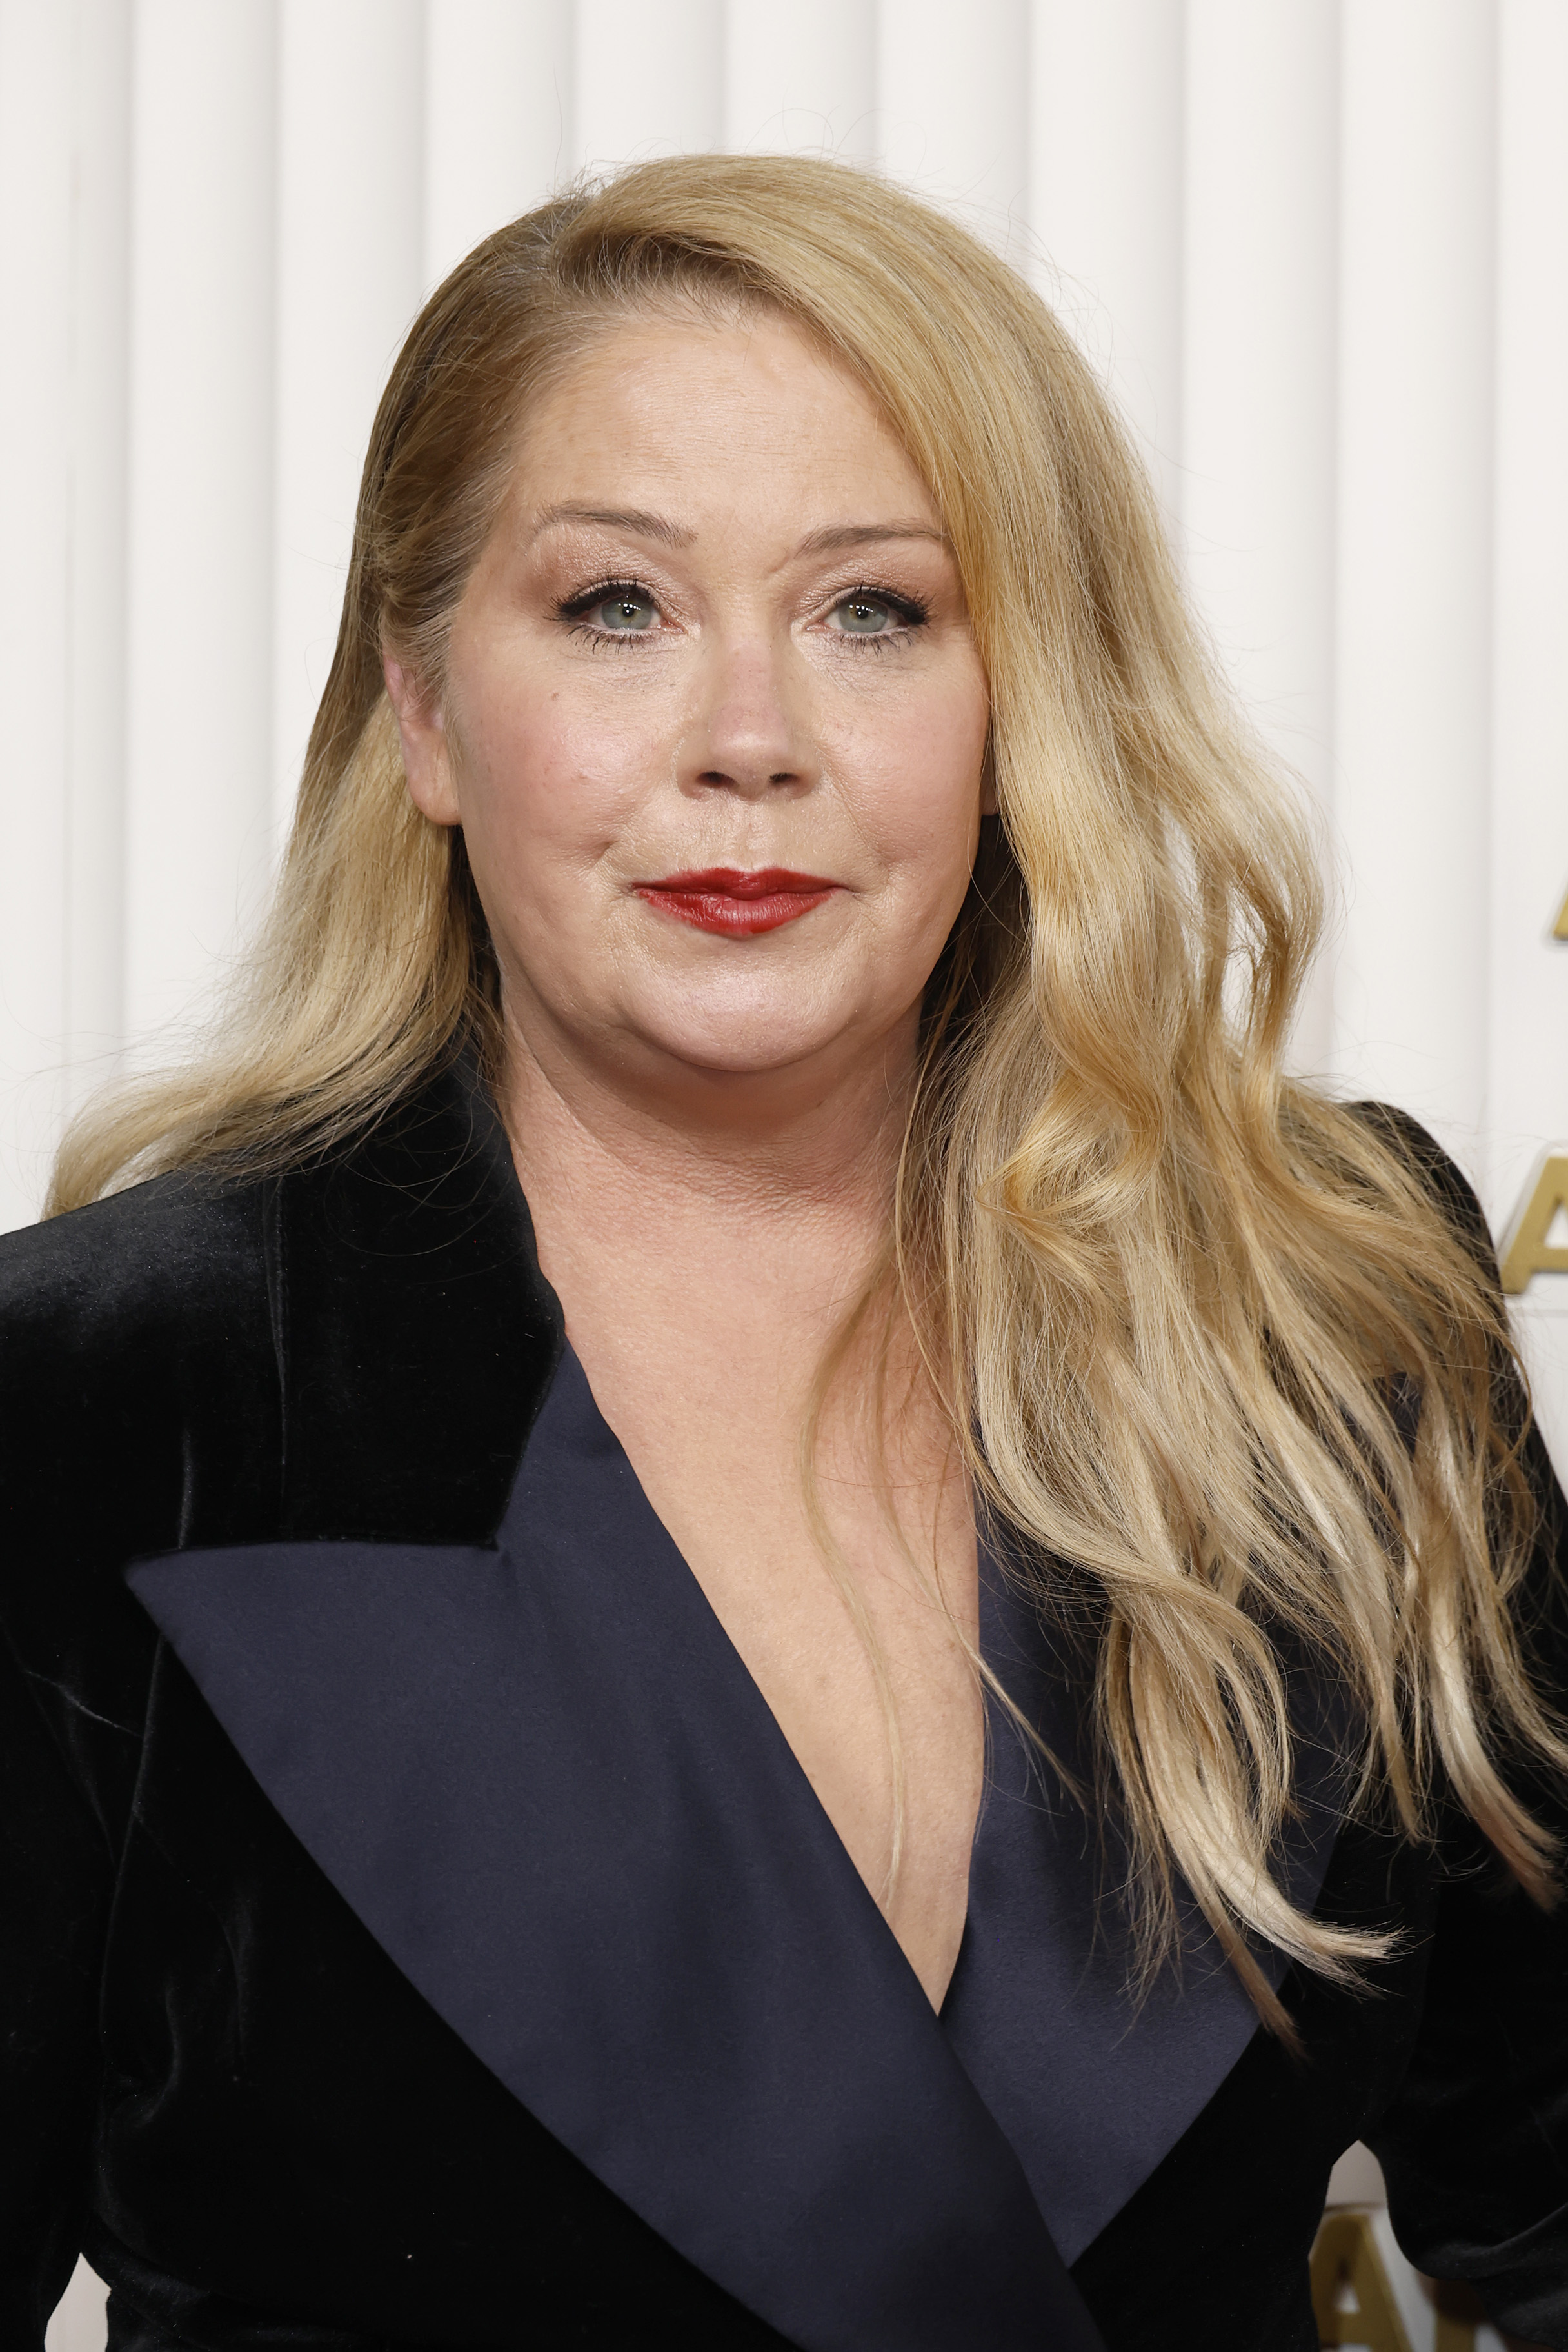 Christina Applegate attends the 29th Annual Screen Actors Guild Awards at Fairmont Century Plaza in Los Angeles, California, on February 26, 2023. | Source: Getty Images